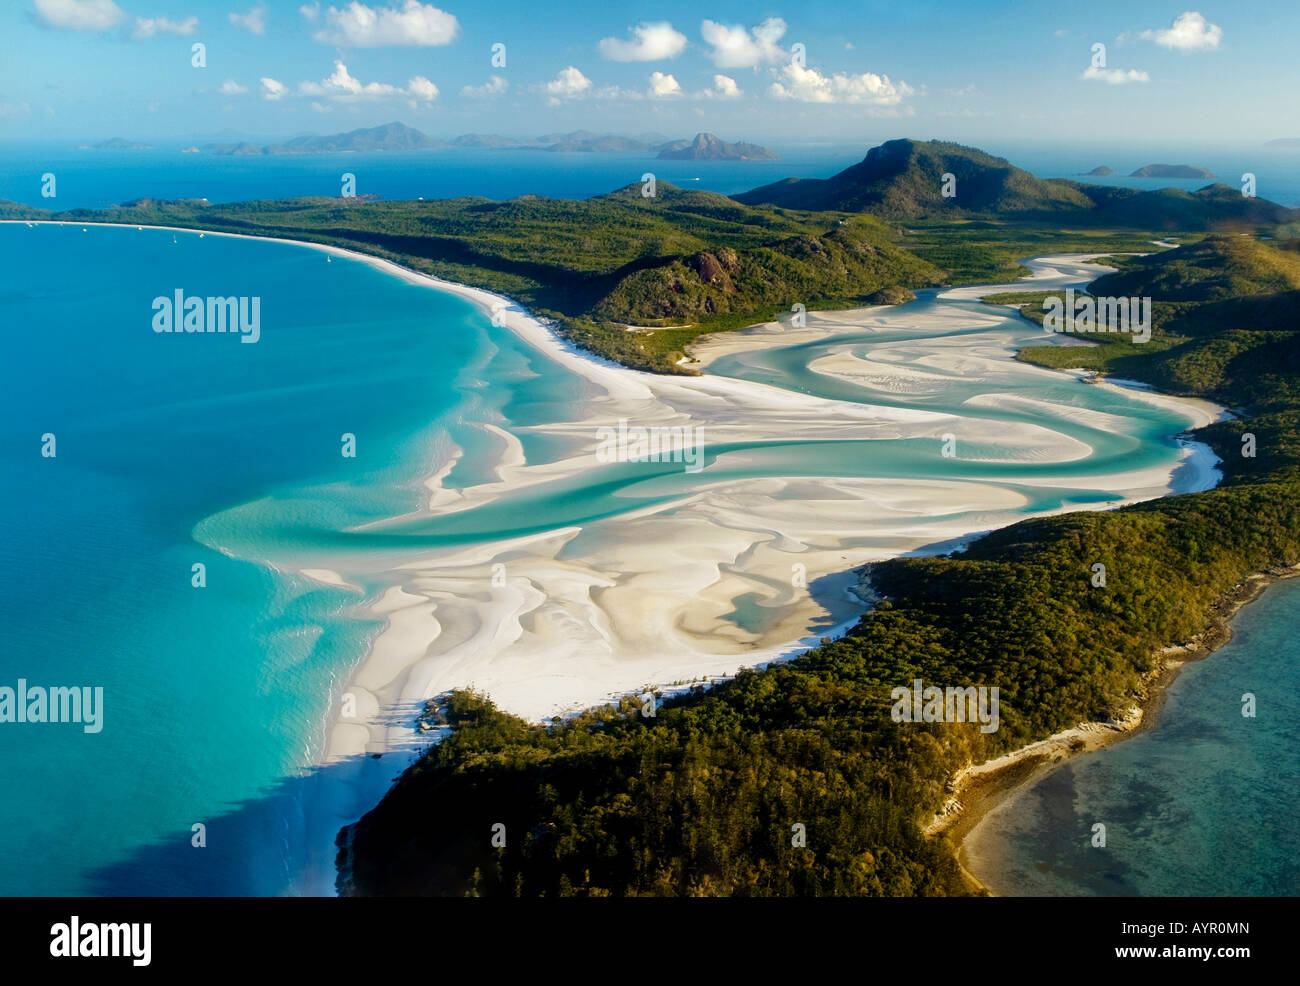 Aerial shot of Whitehaven Beach, Whitsunday Island, Great Barrier Reef, Queensland, Australia Stock Photo